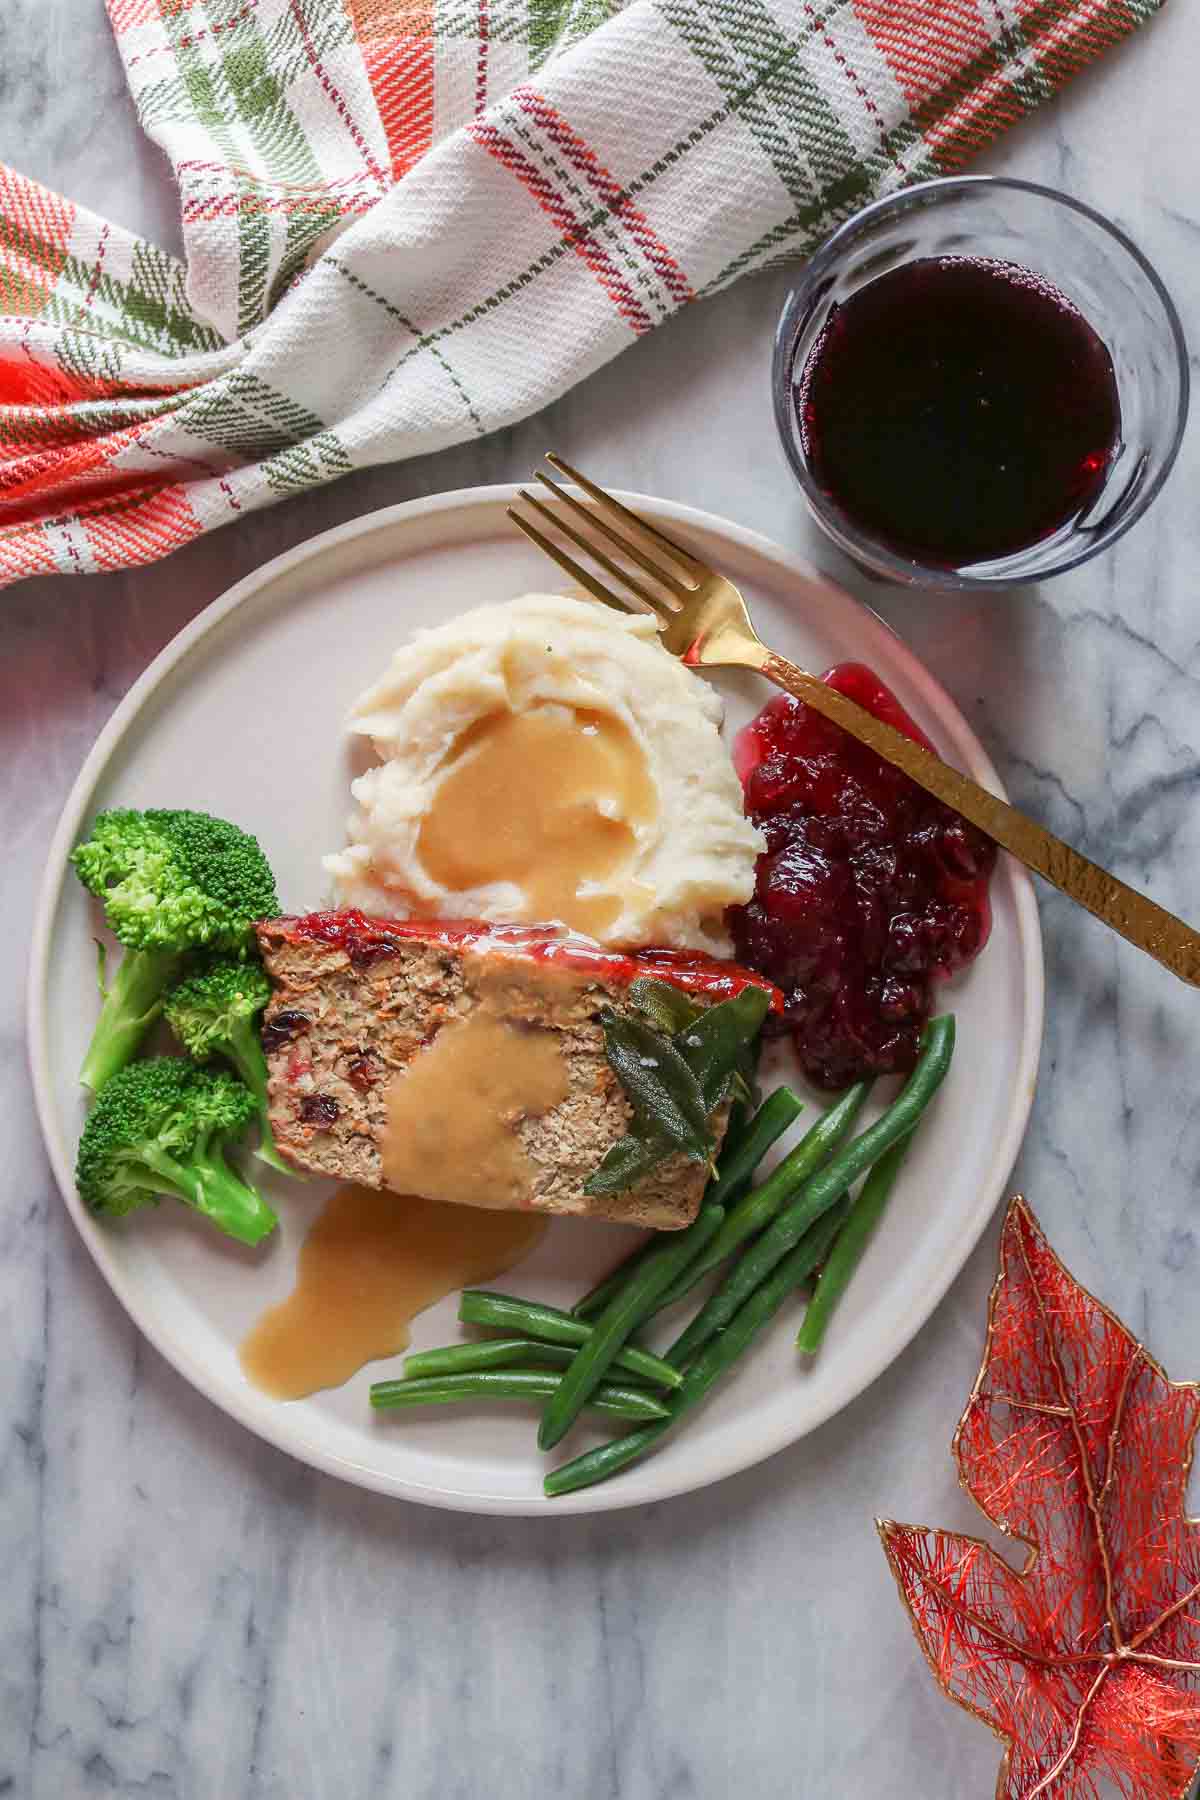 Slice of turkey meatloaf with sides on a plate alongside a glass of red wine.